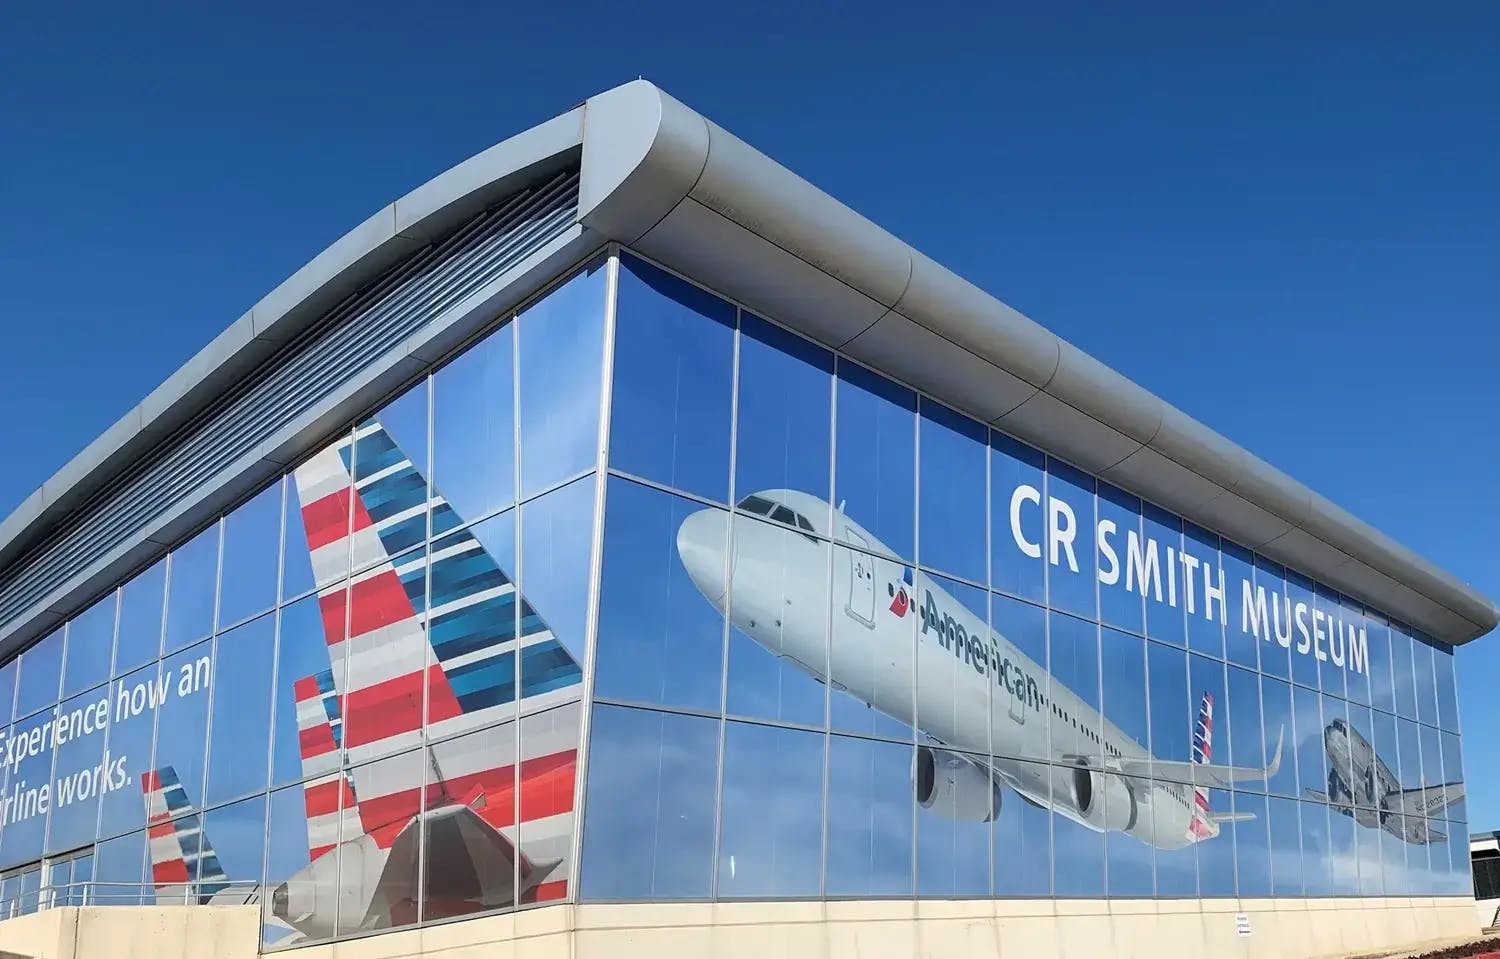 American Airlines CR Smith Museum website redesigned by Sorcery